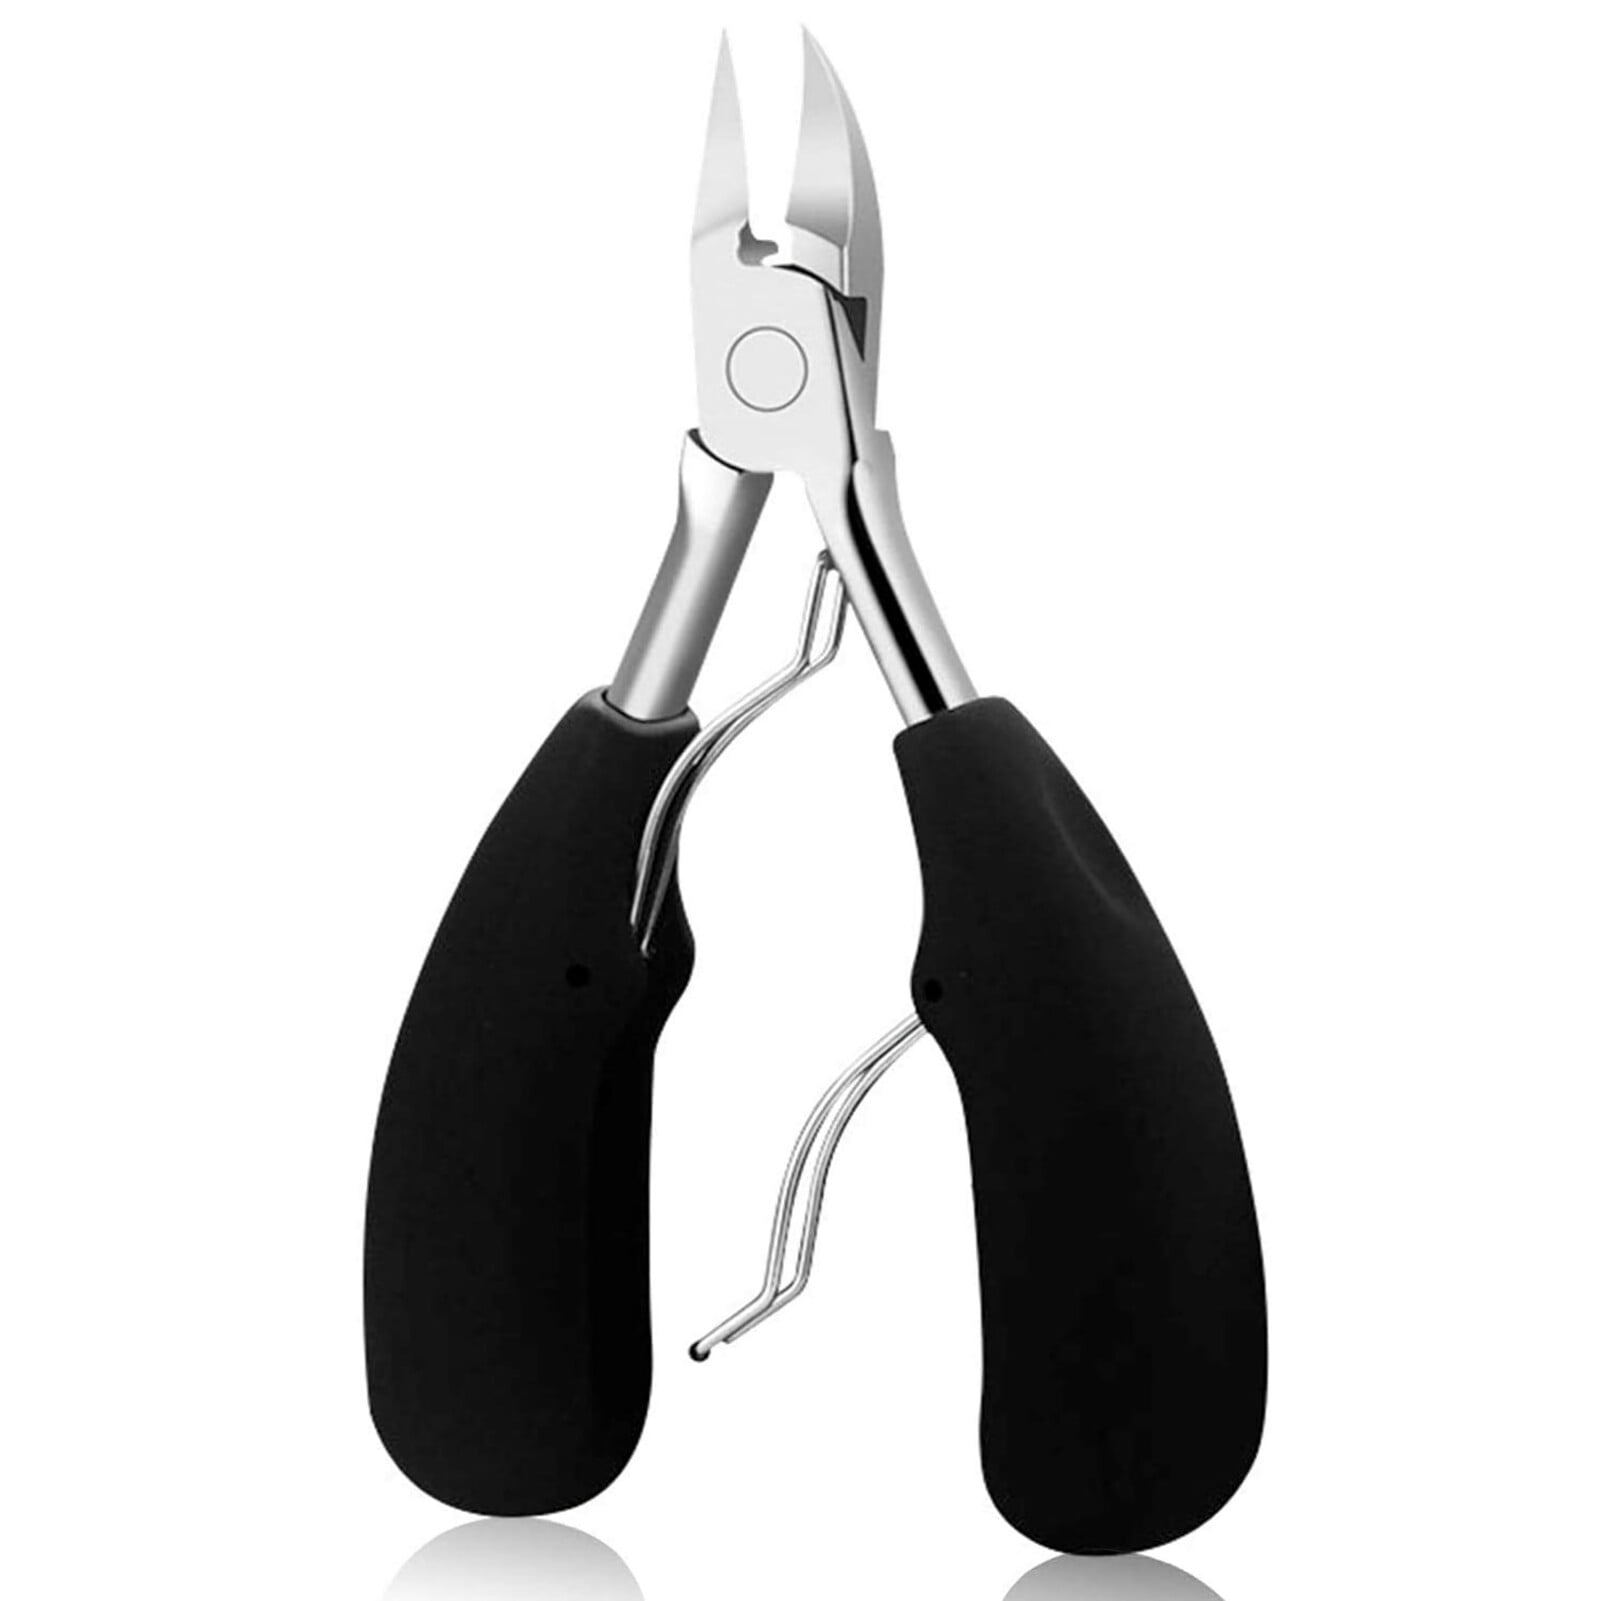 QZBON Black Nail Clippers For Thick Nails - Wide Jaw Opening Oversized Nail  Clippers, Stainless Steel Heavy Duty Toenail Clippers For Thick Nails,  Extra Large Toenail Clippers for Men Seniors Elderly 